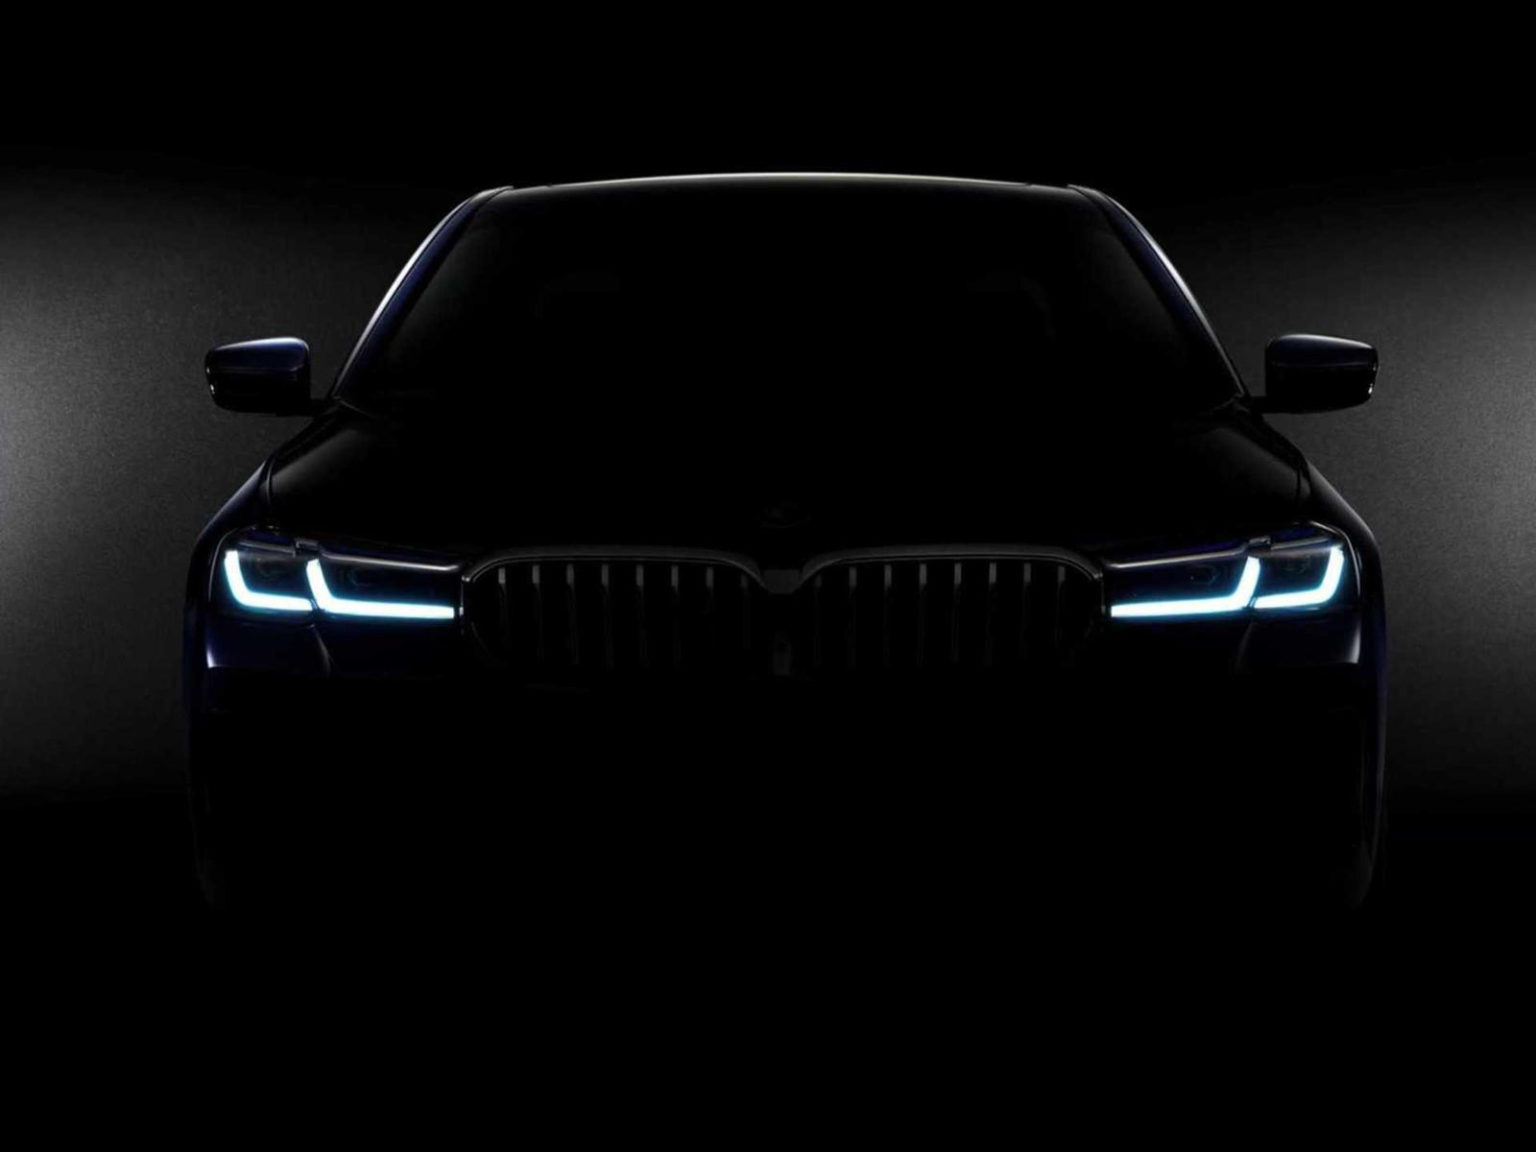 BMW is marching ahead with its plan to tease the forthcoming 5 Series facelift.